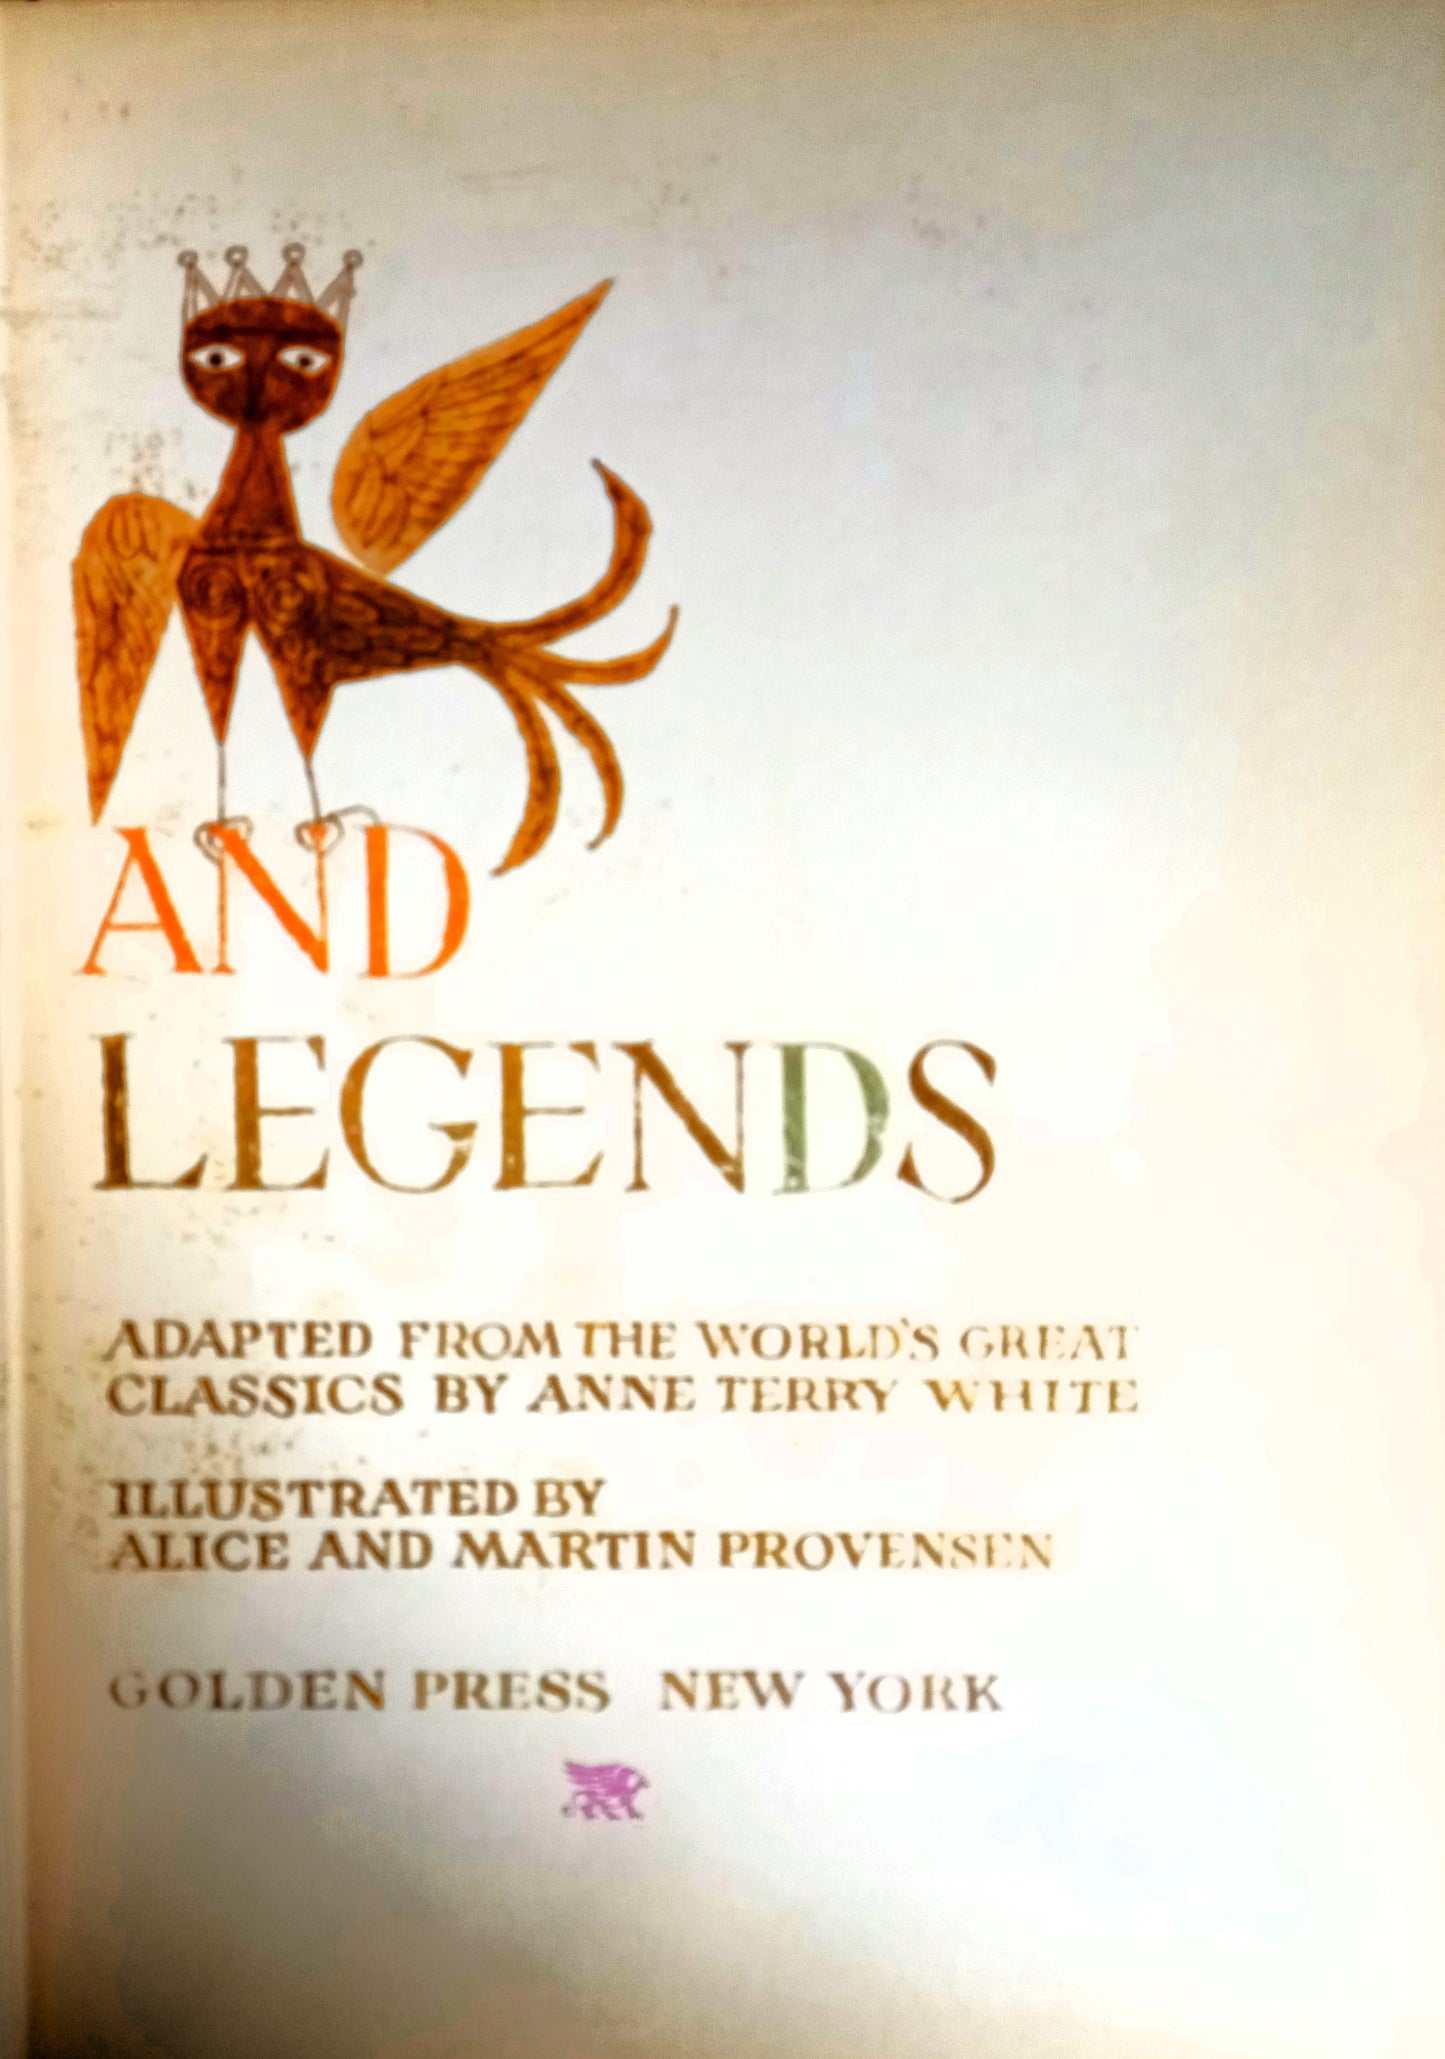 The Golden Treasury of Myths and Legends